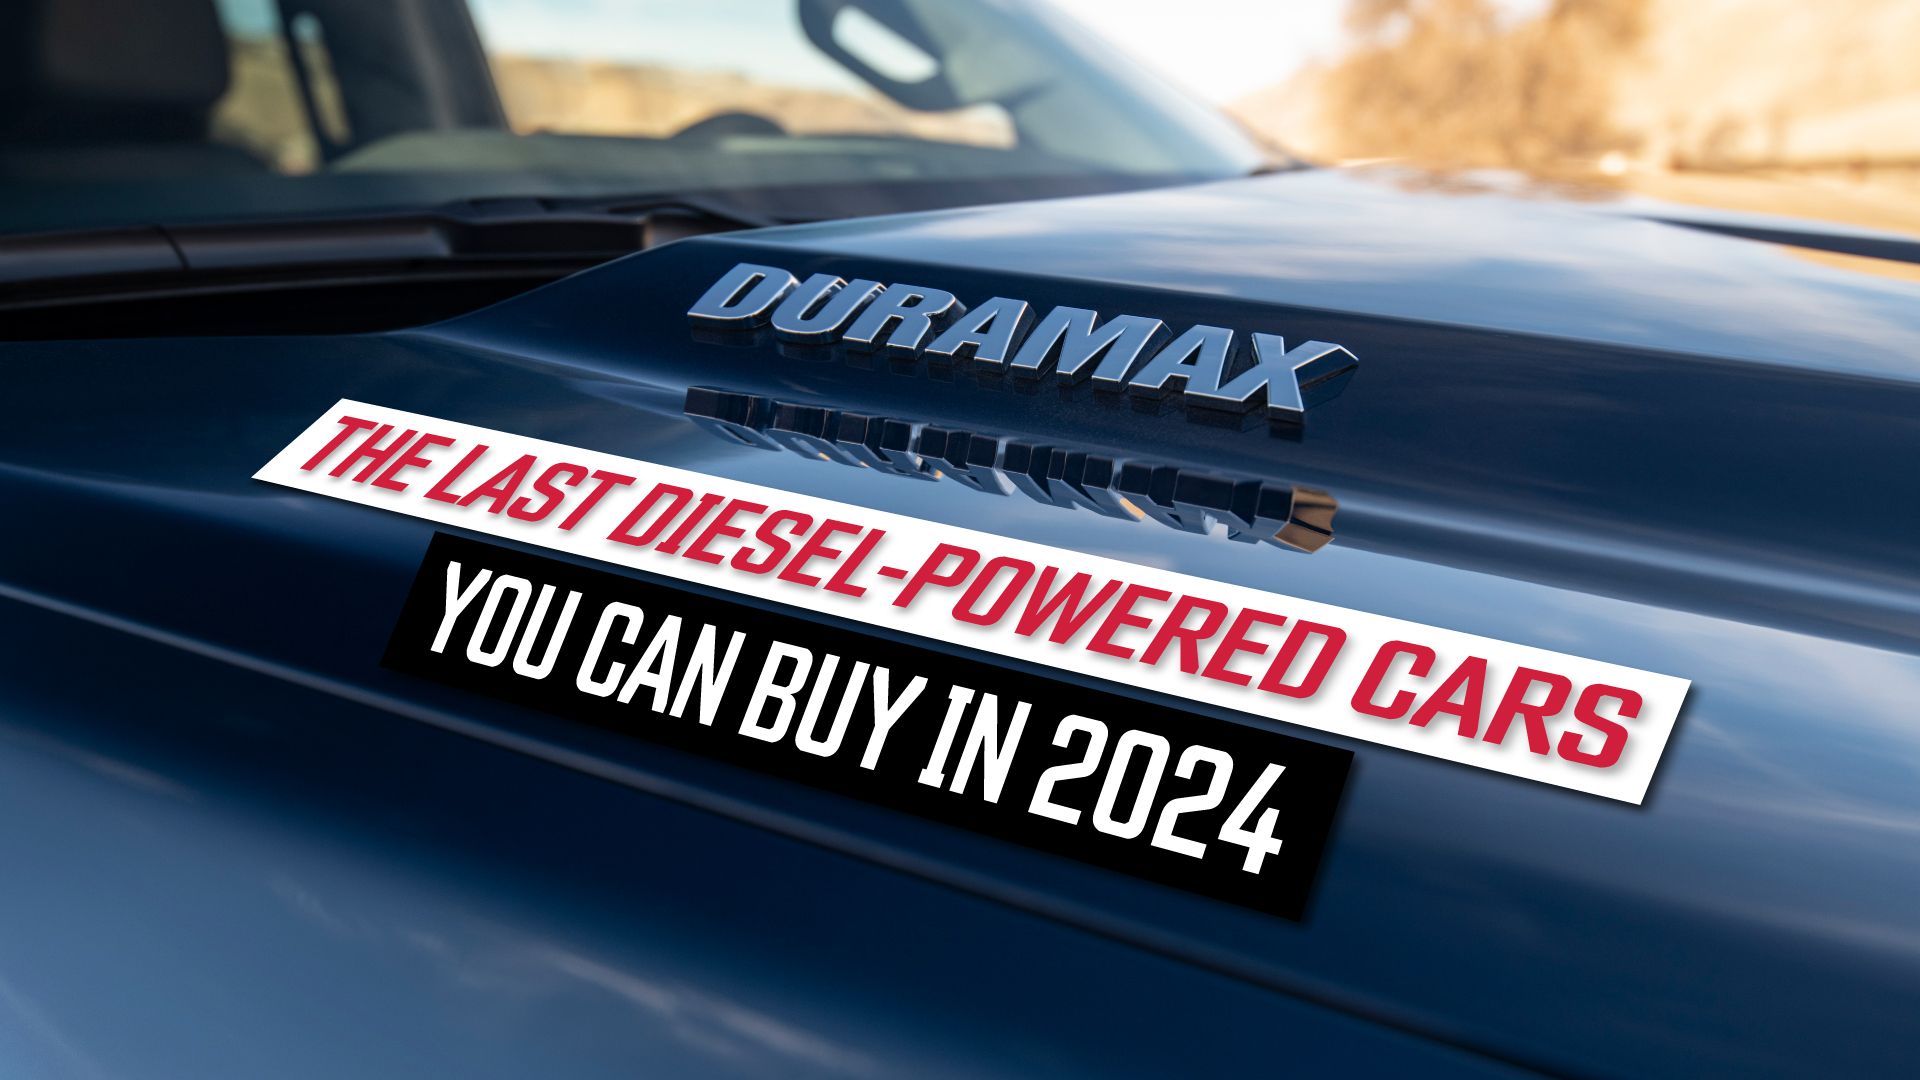 The-Last-Diesel-Powered-Cars-You-Can-Buy-In-2024